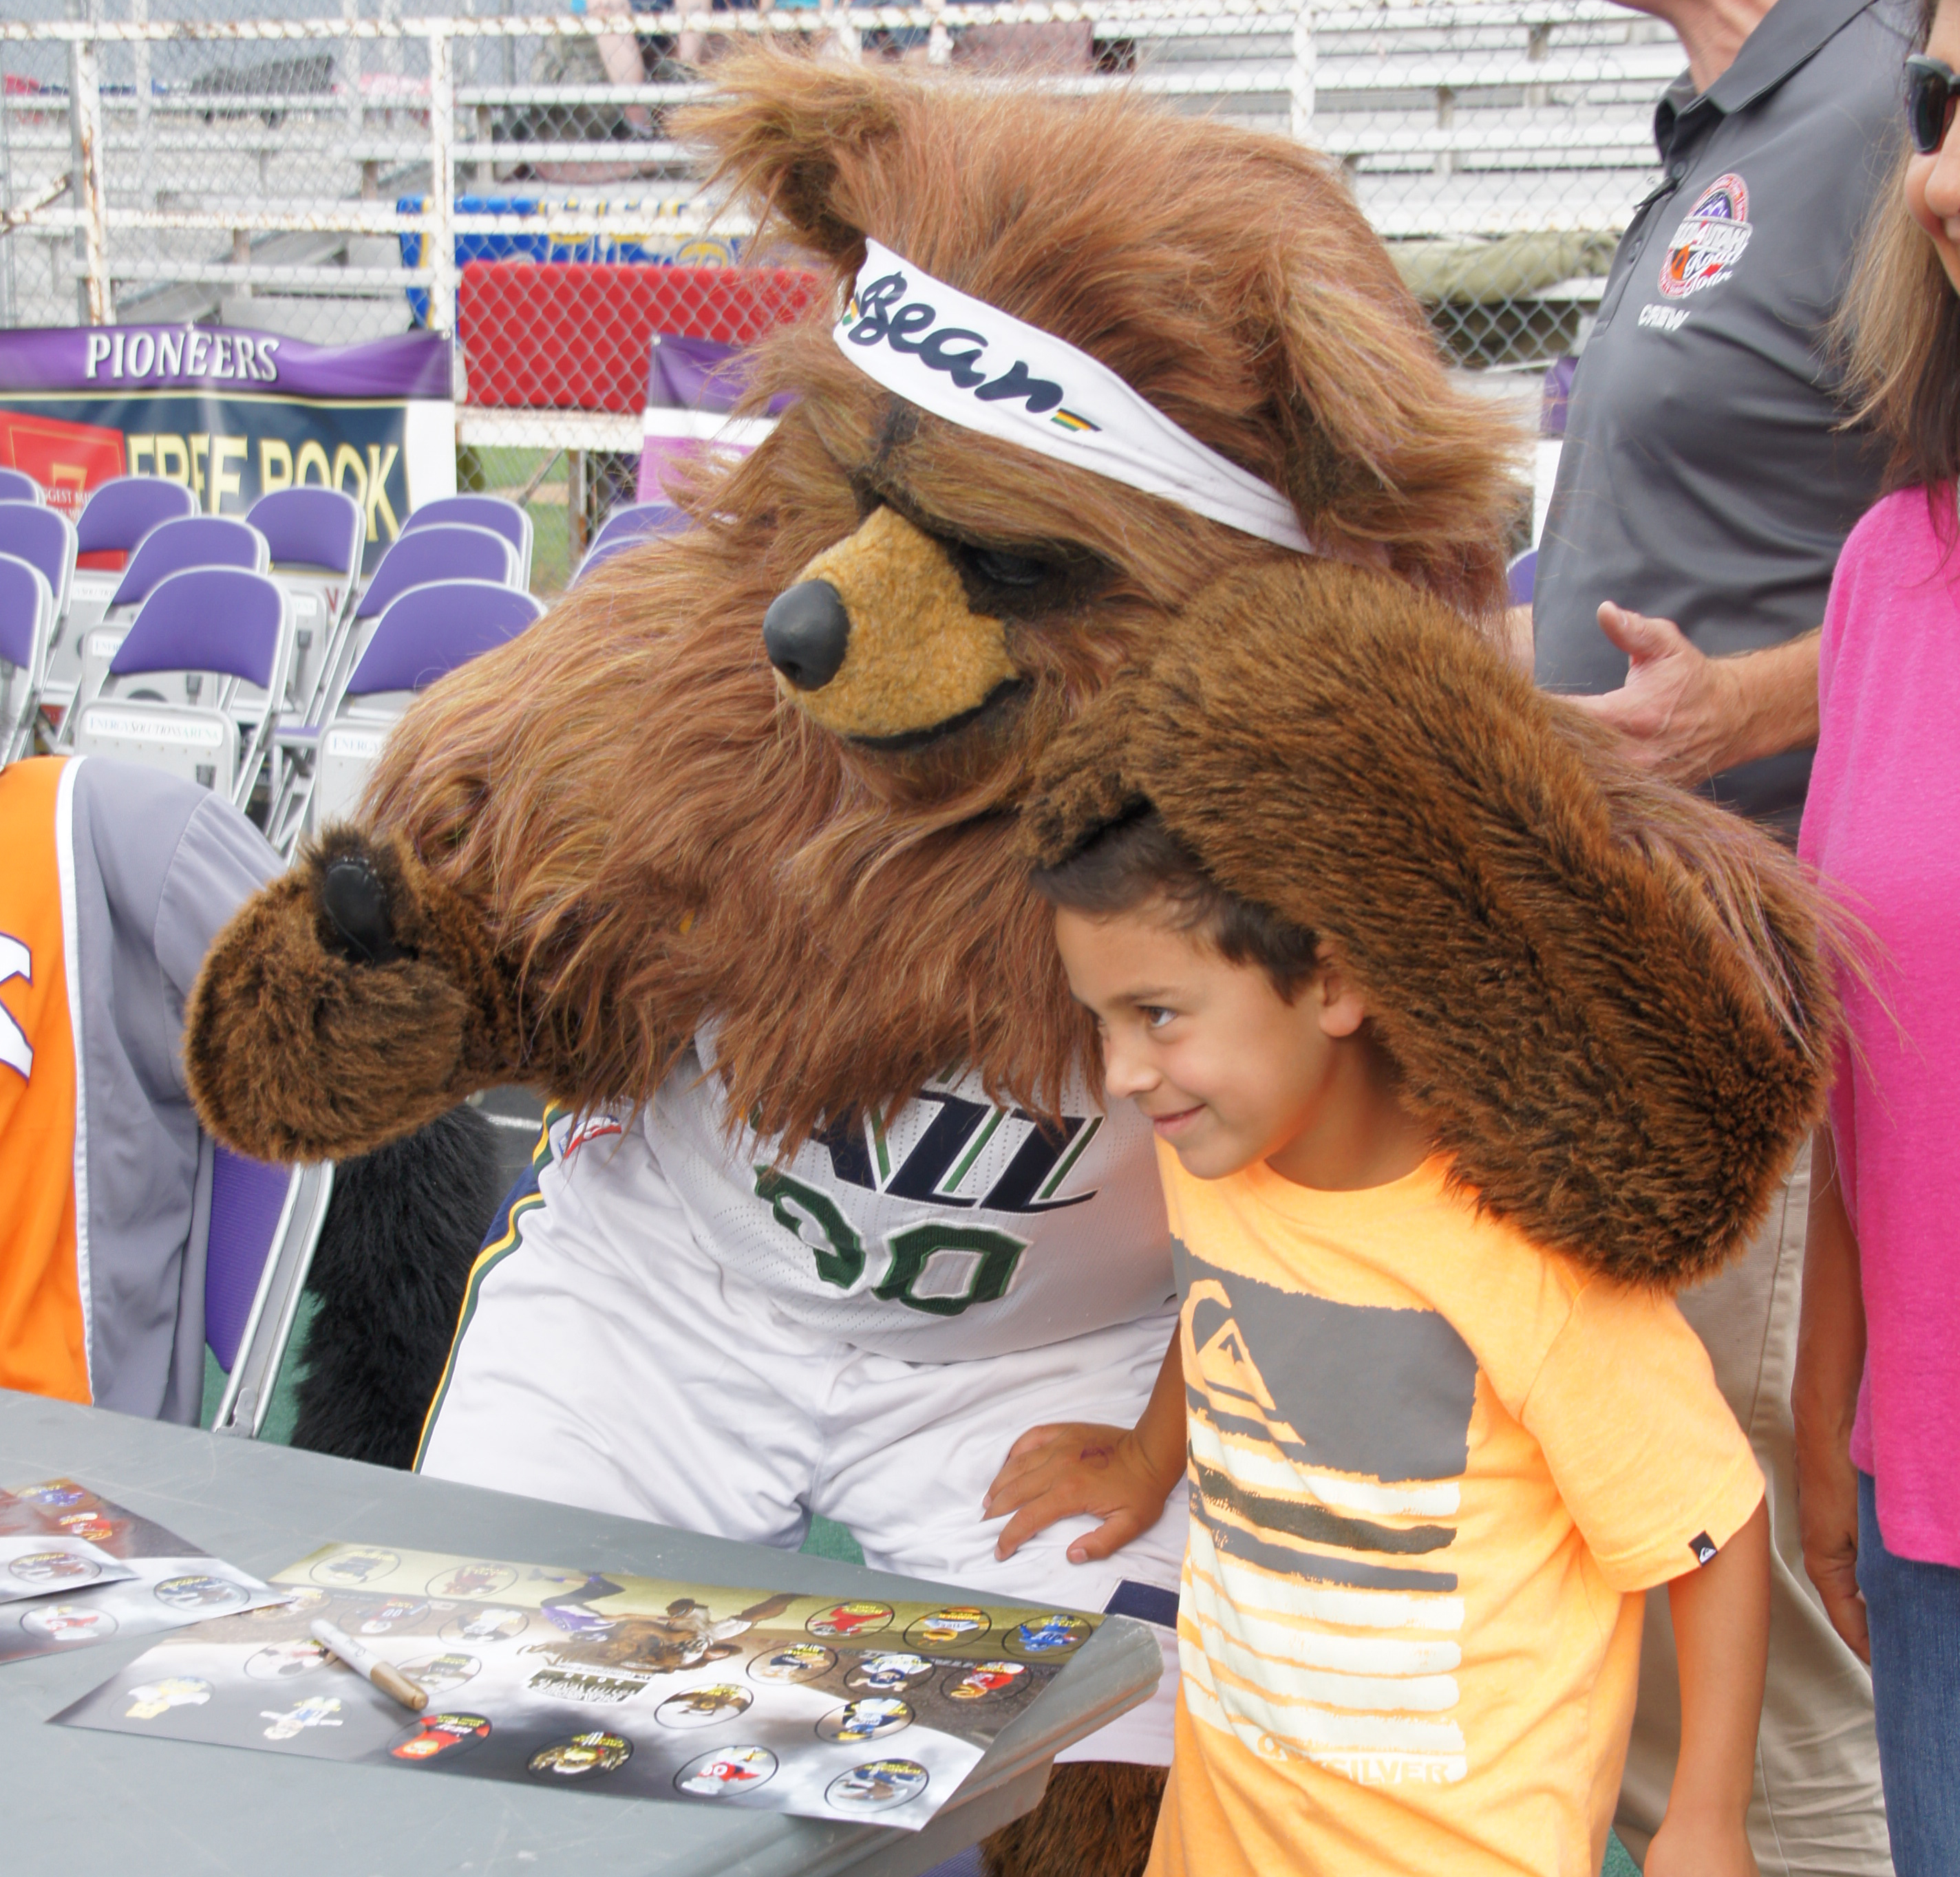 Jazz Bear to Participate in Mascot Bowl